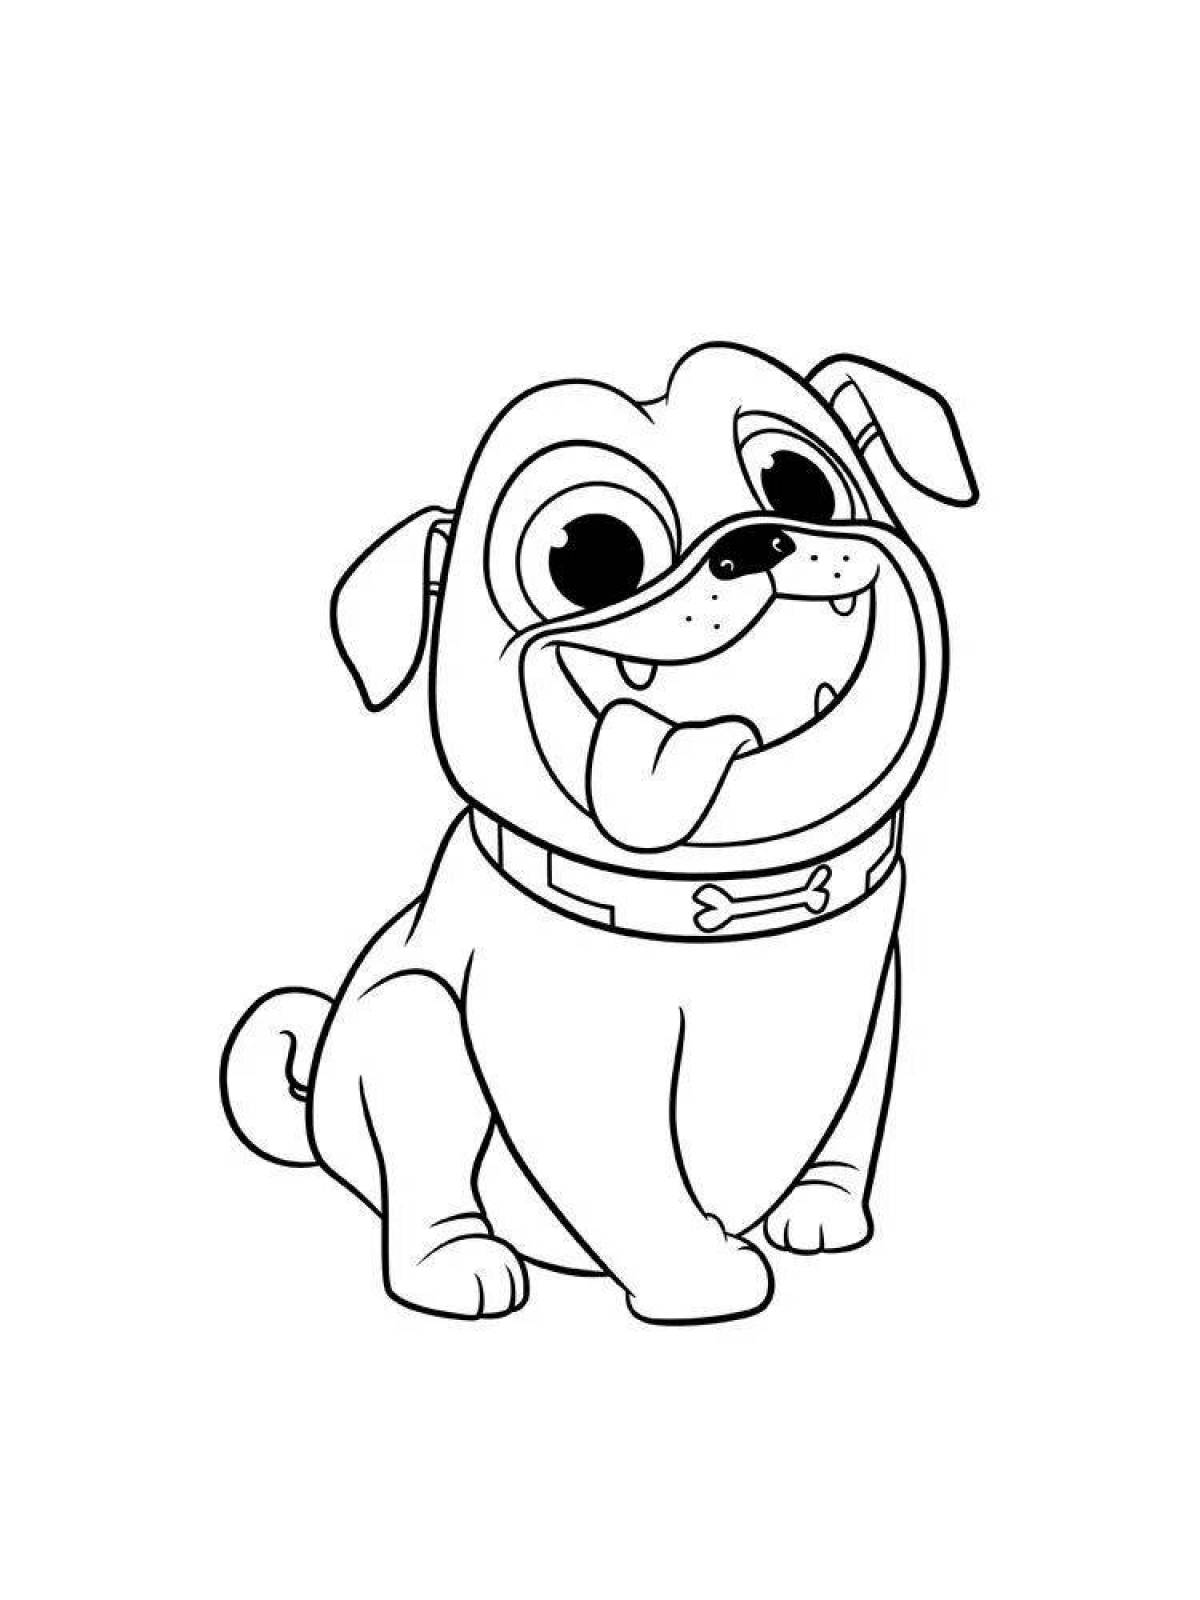 Color-luminous bingo and roles coloring page